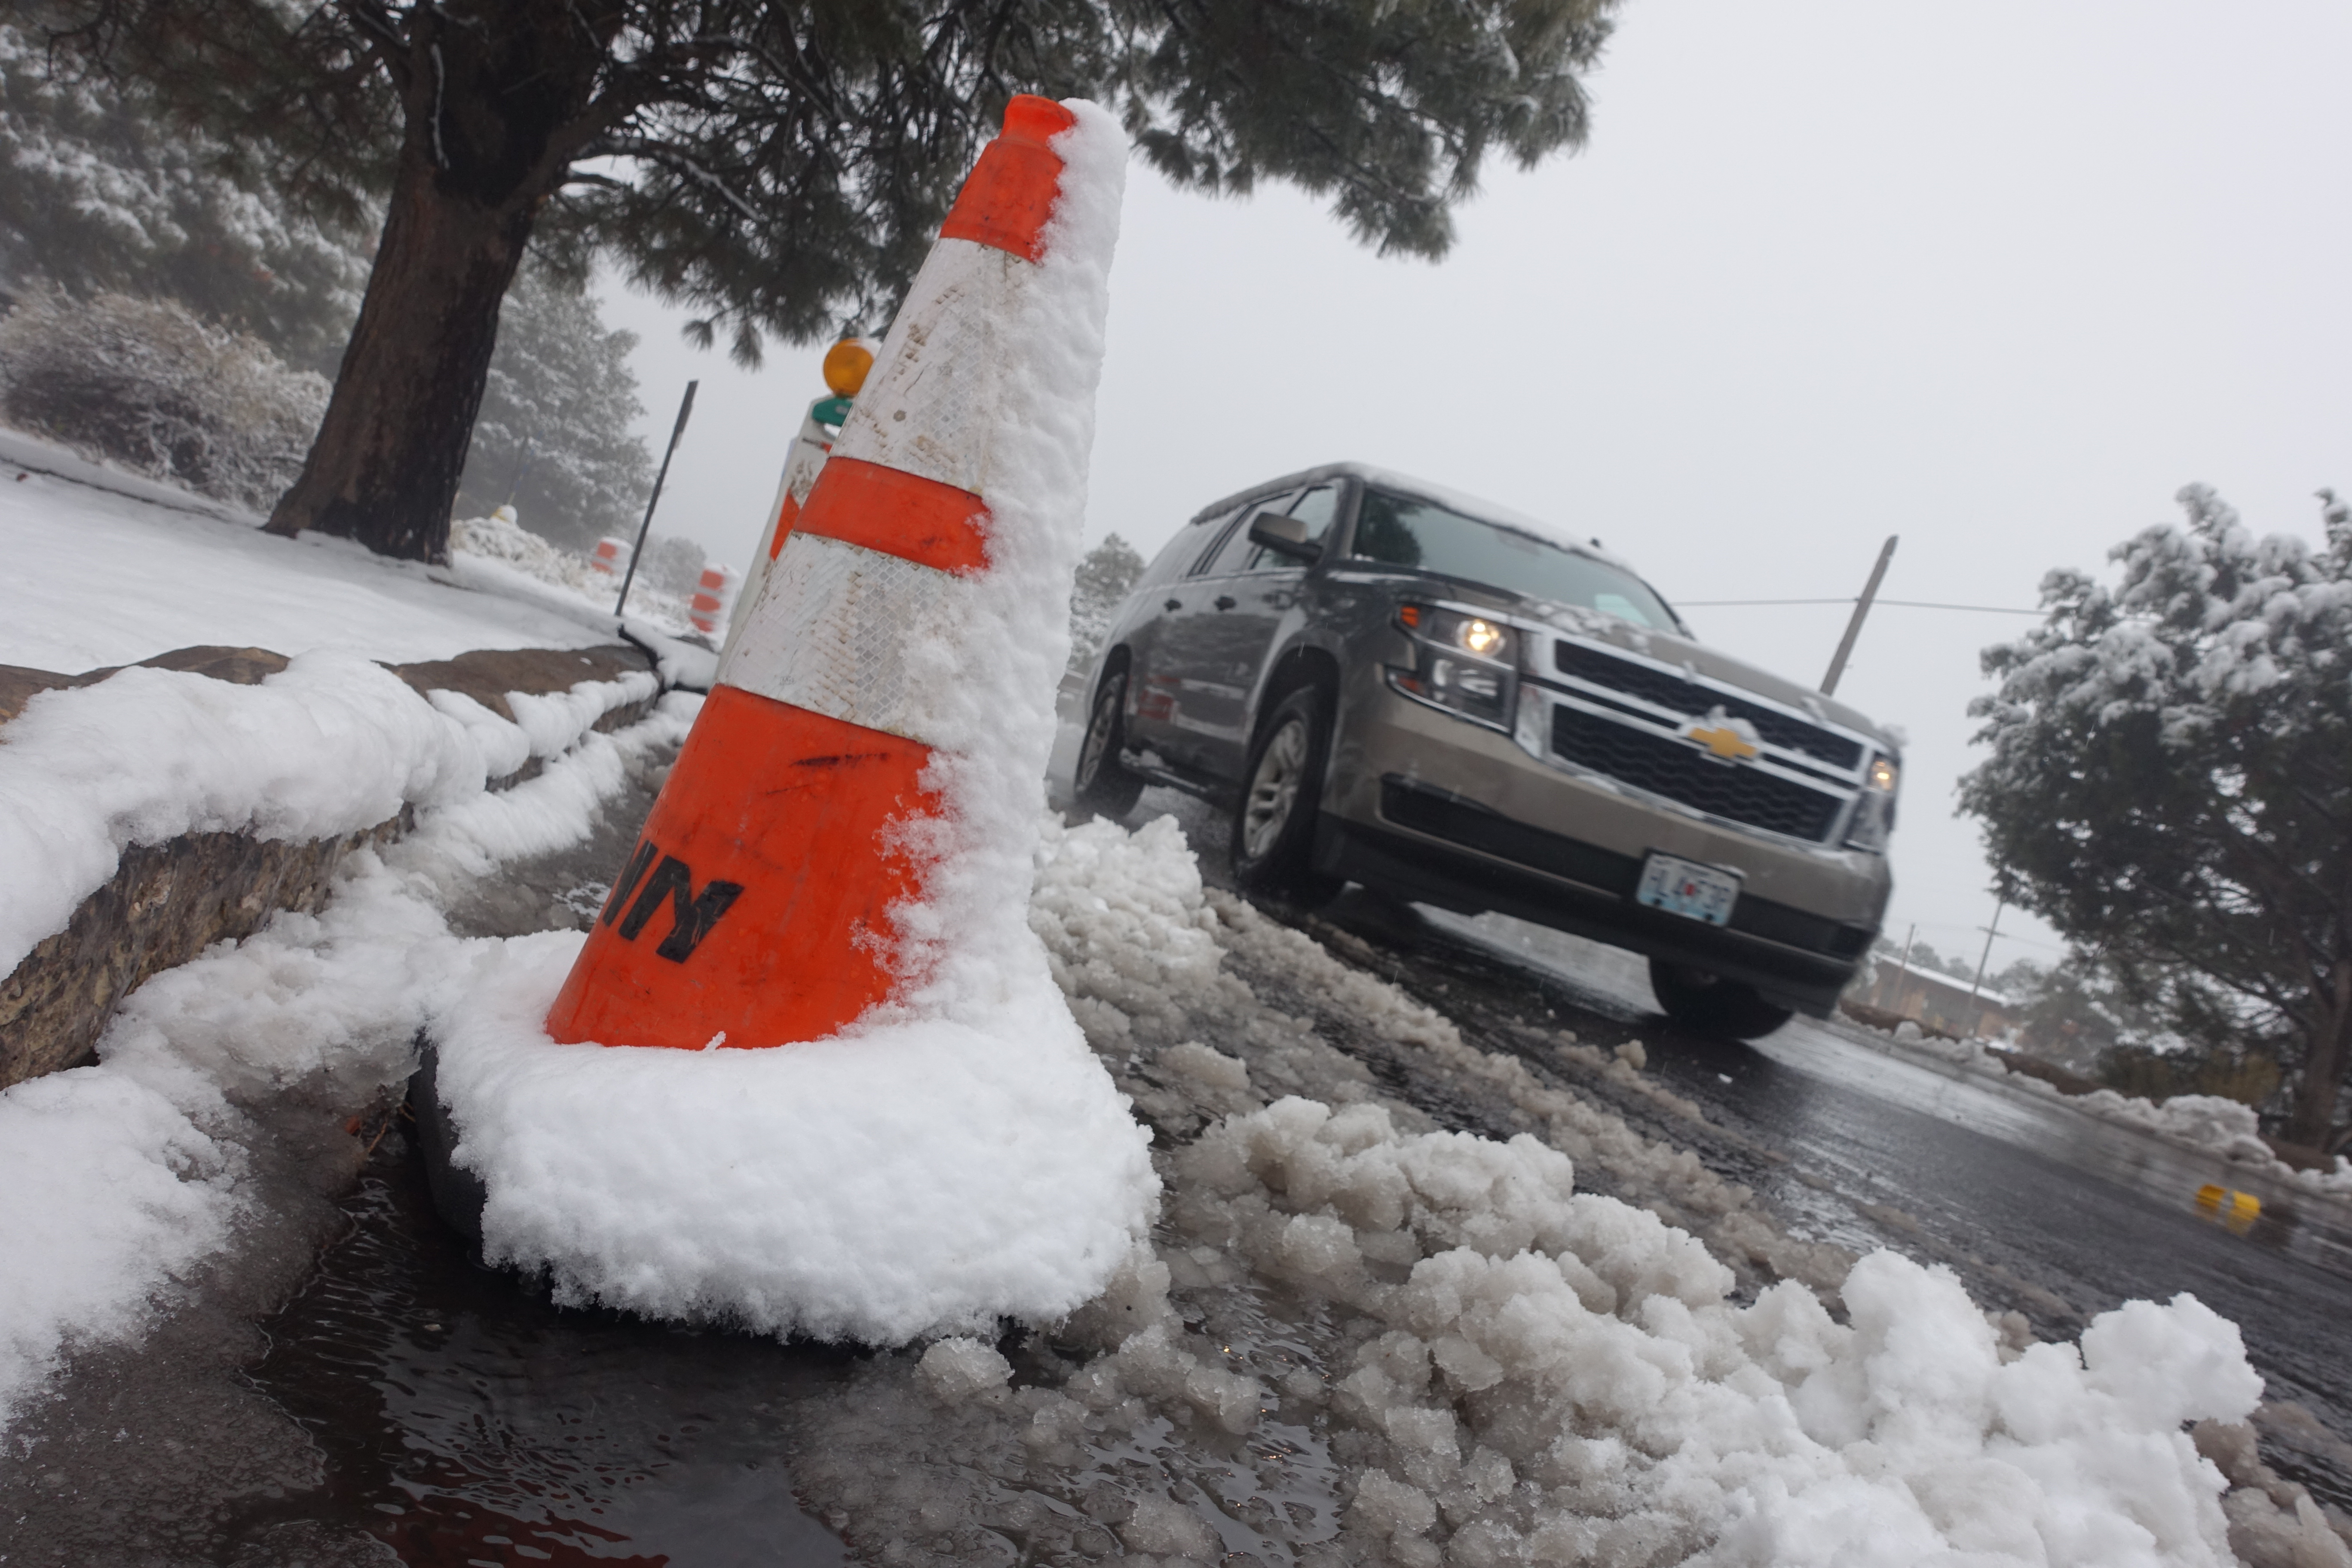 A close up of a traffic cone in the snow, in the background an SUV passes through.